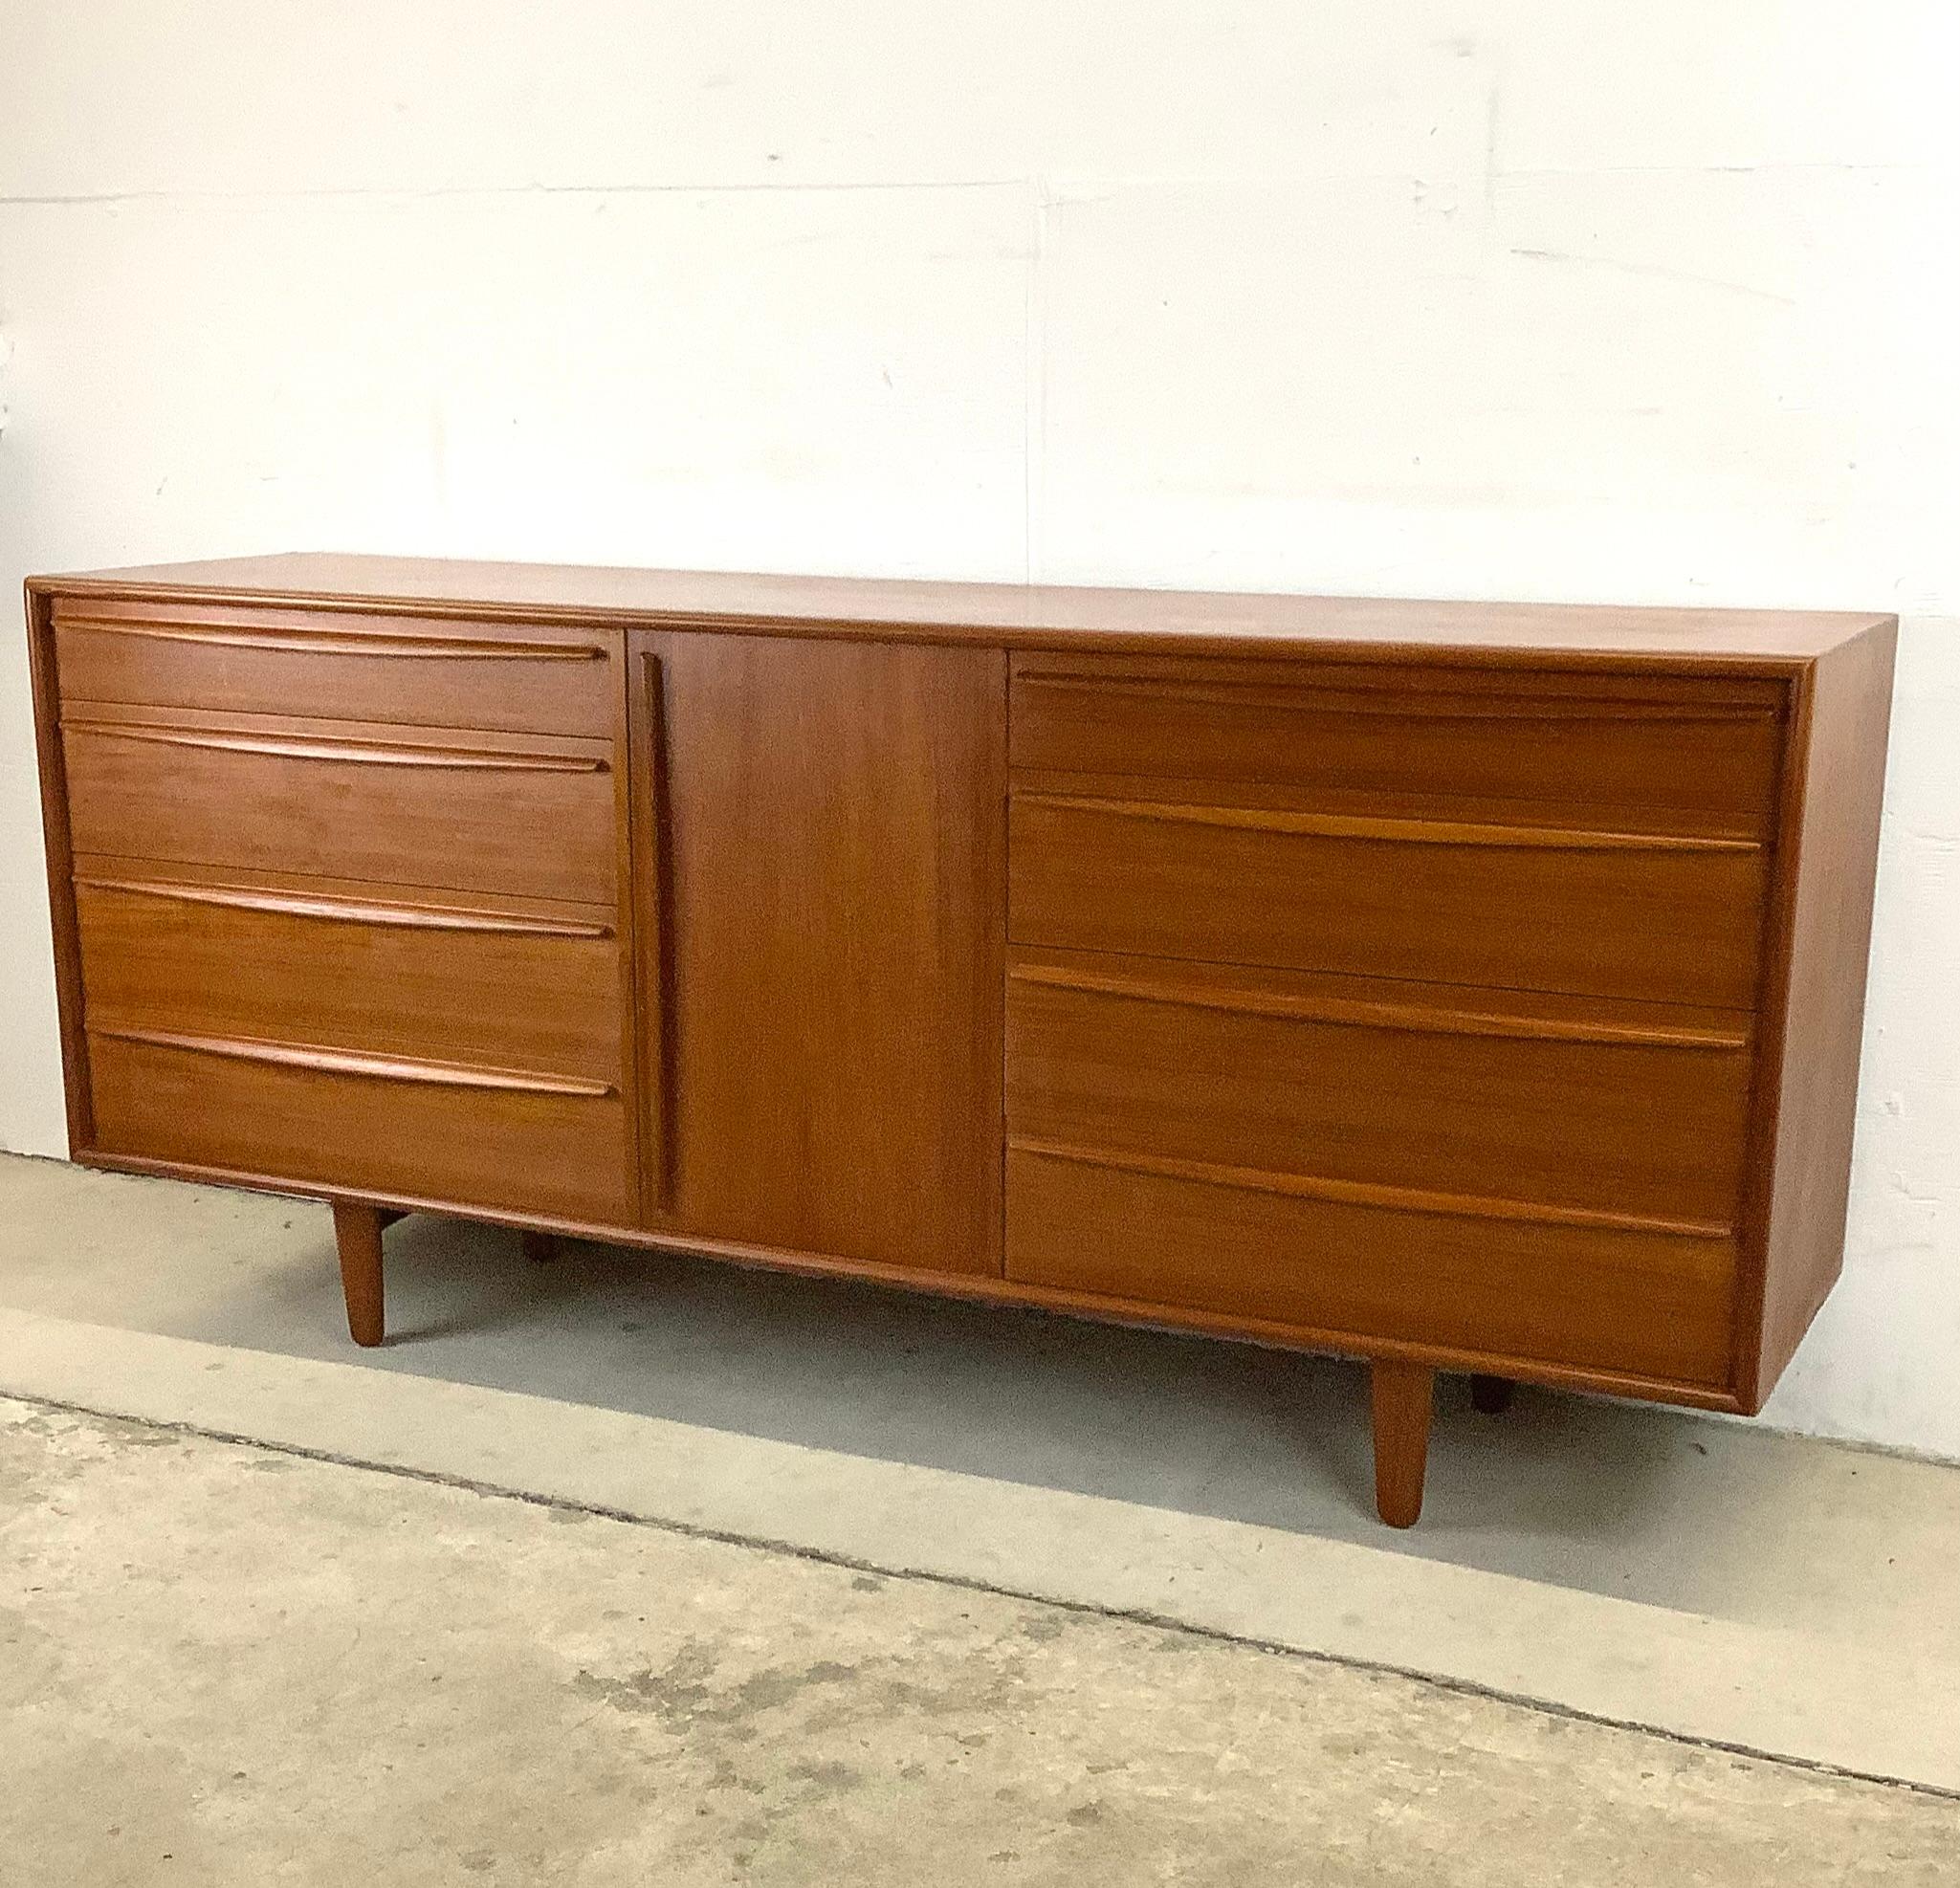 This stunning vintage modern teak dresser from Lyby Mobler features a stunning array of eight dovetailed drawers combined with center shelved cabinet. The stylish storage in this vintage modern piece offers plenty of bedroom organization options in